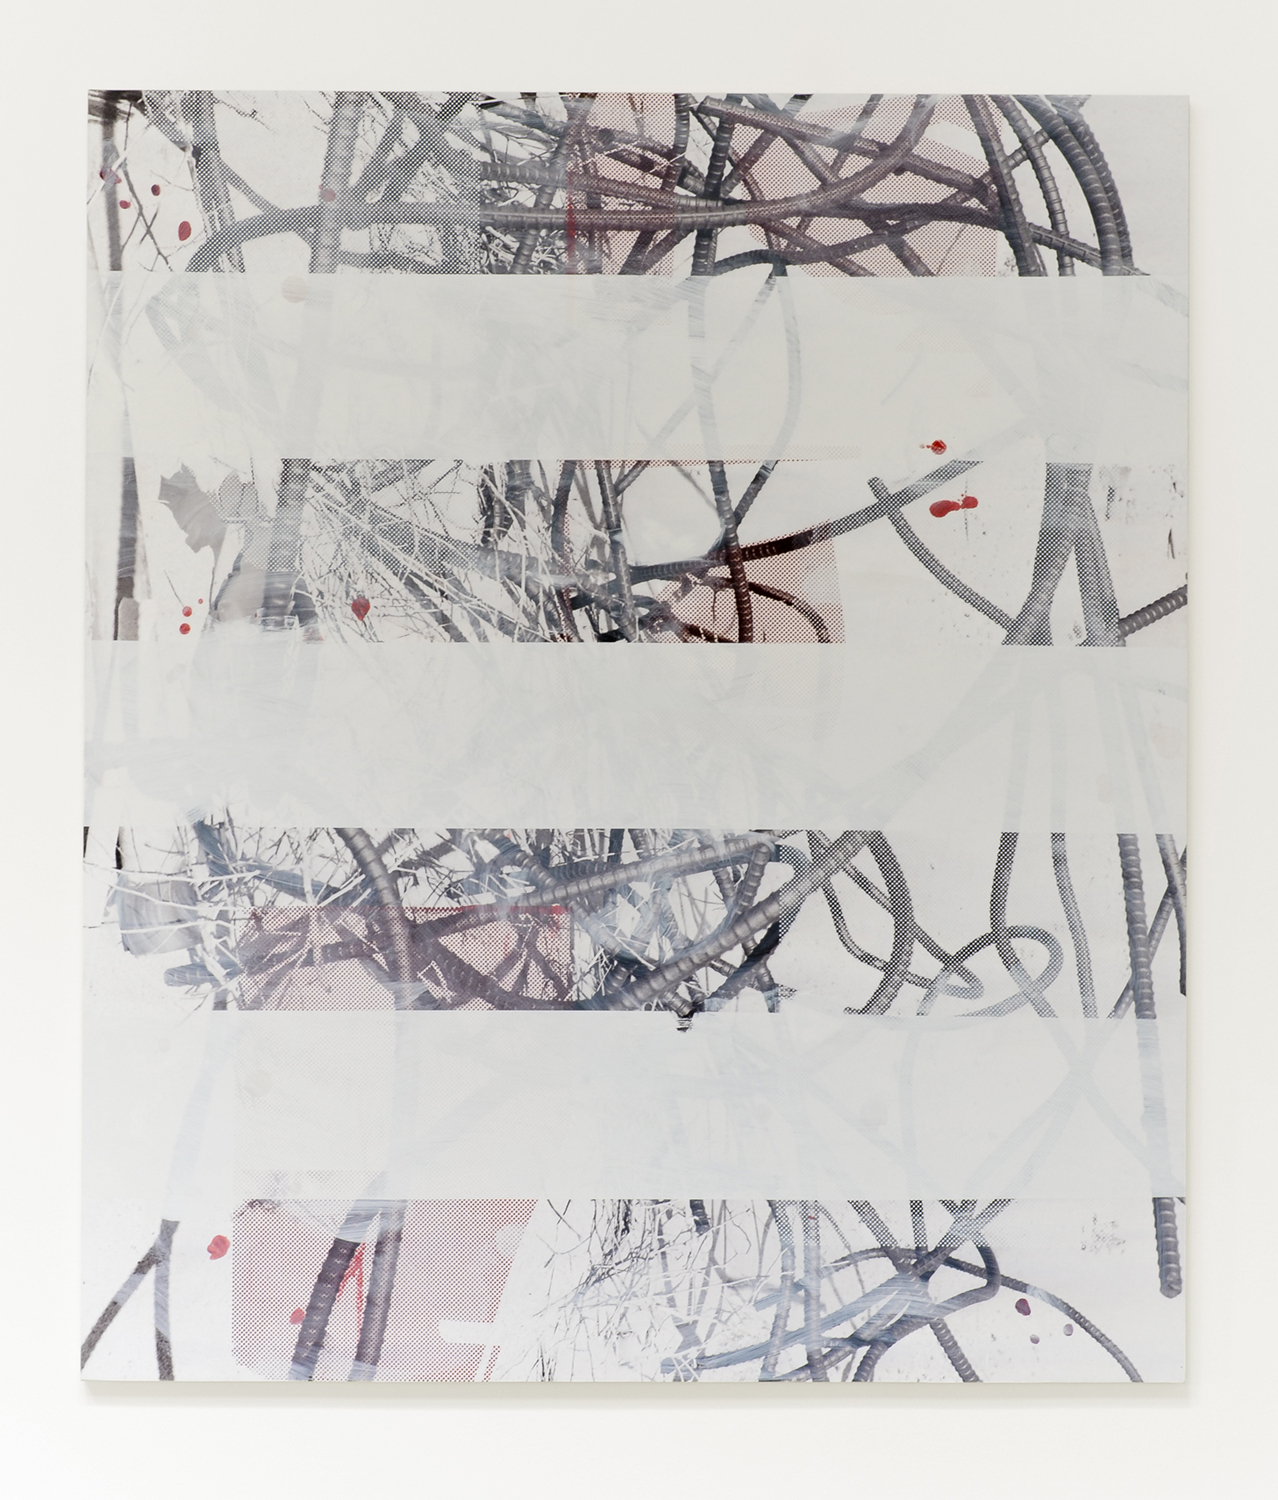  Untitled (rebar 3), 2013  Acrylic, oil and UV cured ink on canvas over panel  84 x 72 inches  213.36 x 182.88 cm       